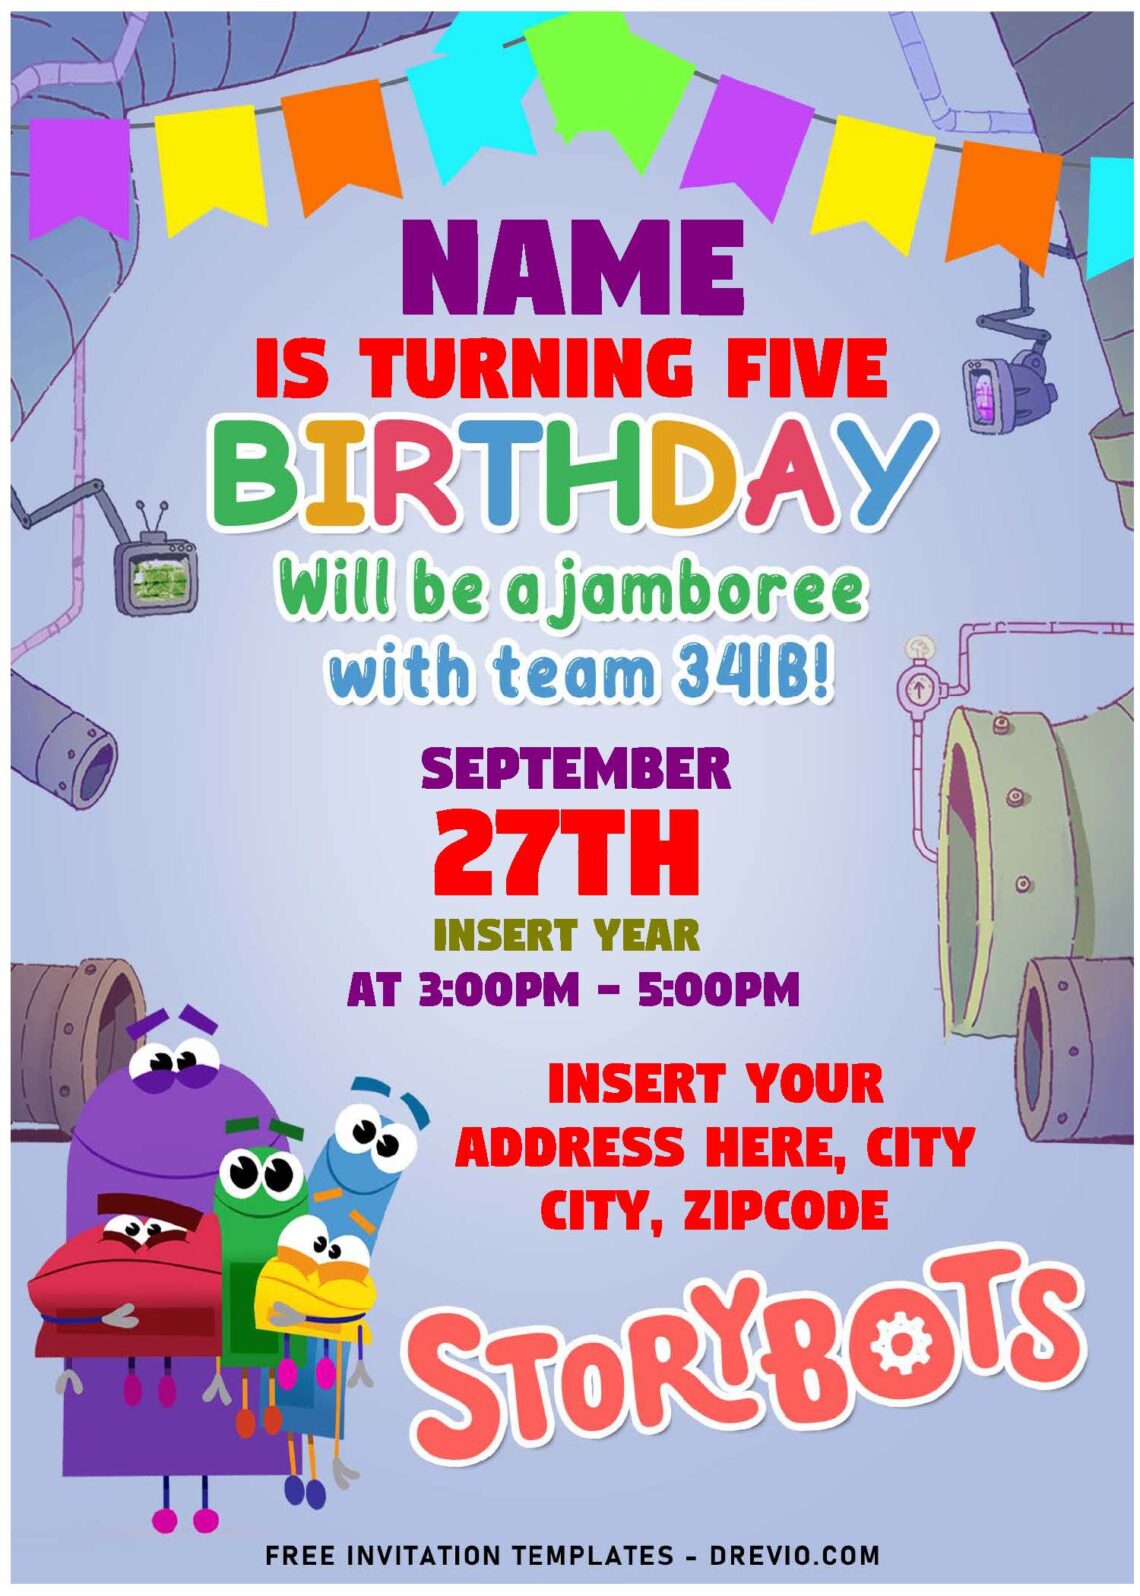 (Free Editable PDF) Friendly And Funny StoryBots Birthday Invitation Templates with cute Blue And Yellow bots